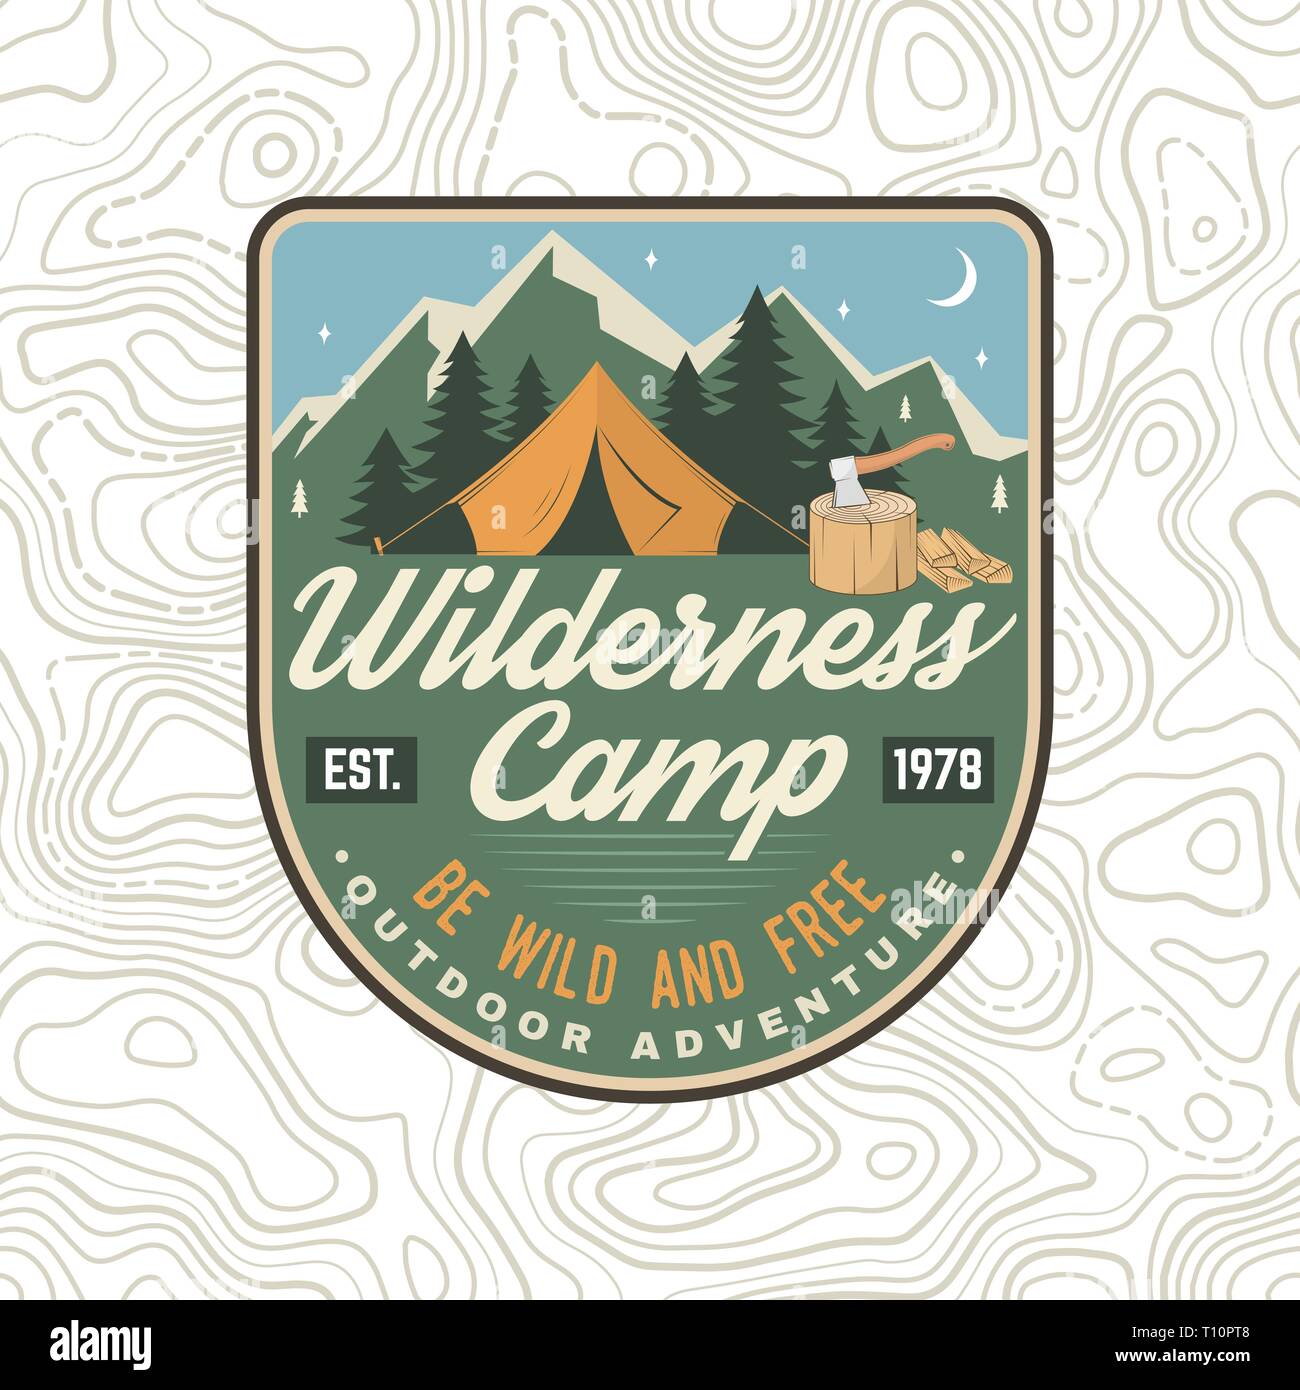 Wilderness camp patch. Be wild and free. Vector illustration. Concept for badge, shirt or logo, print, stamp, apparel or tee. Vintage typography design with campin tent, axe and forest silhouette. Stock Vector